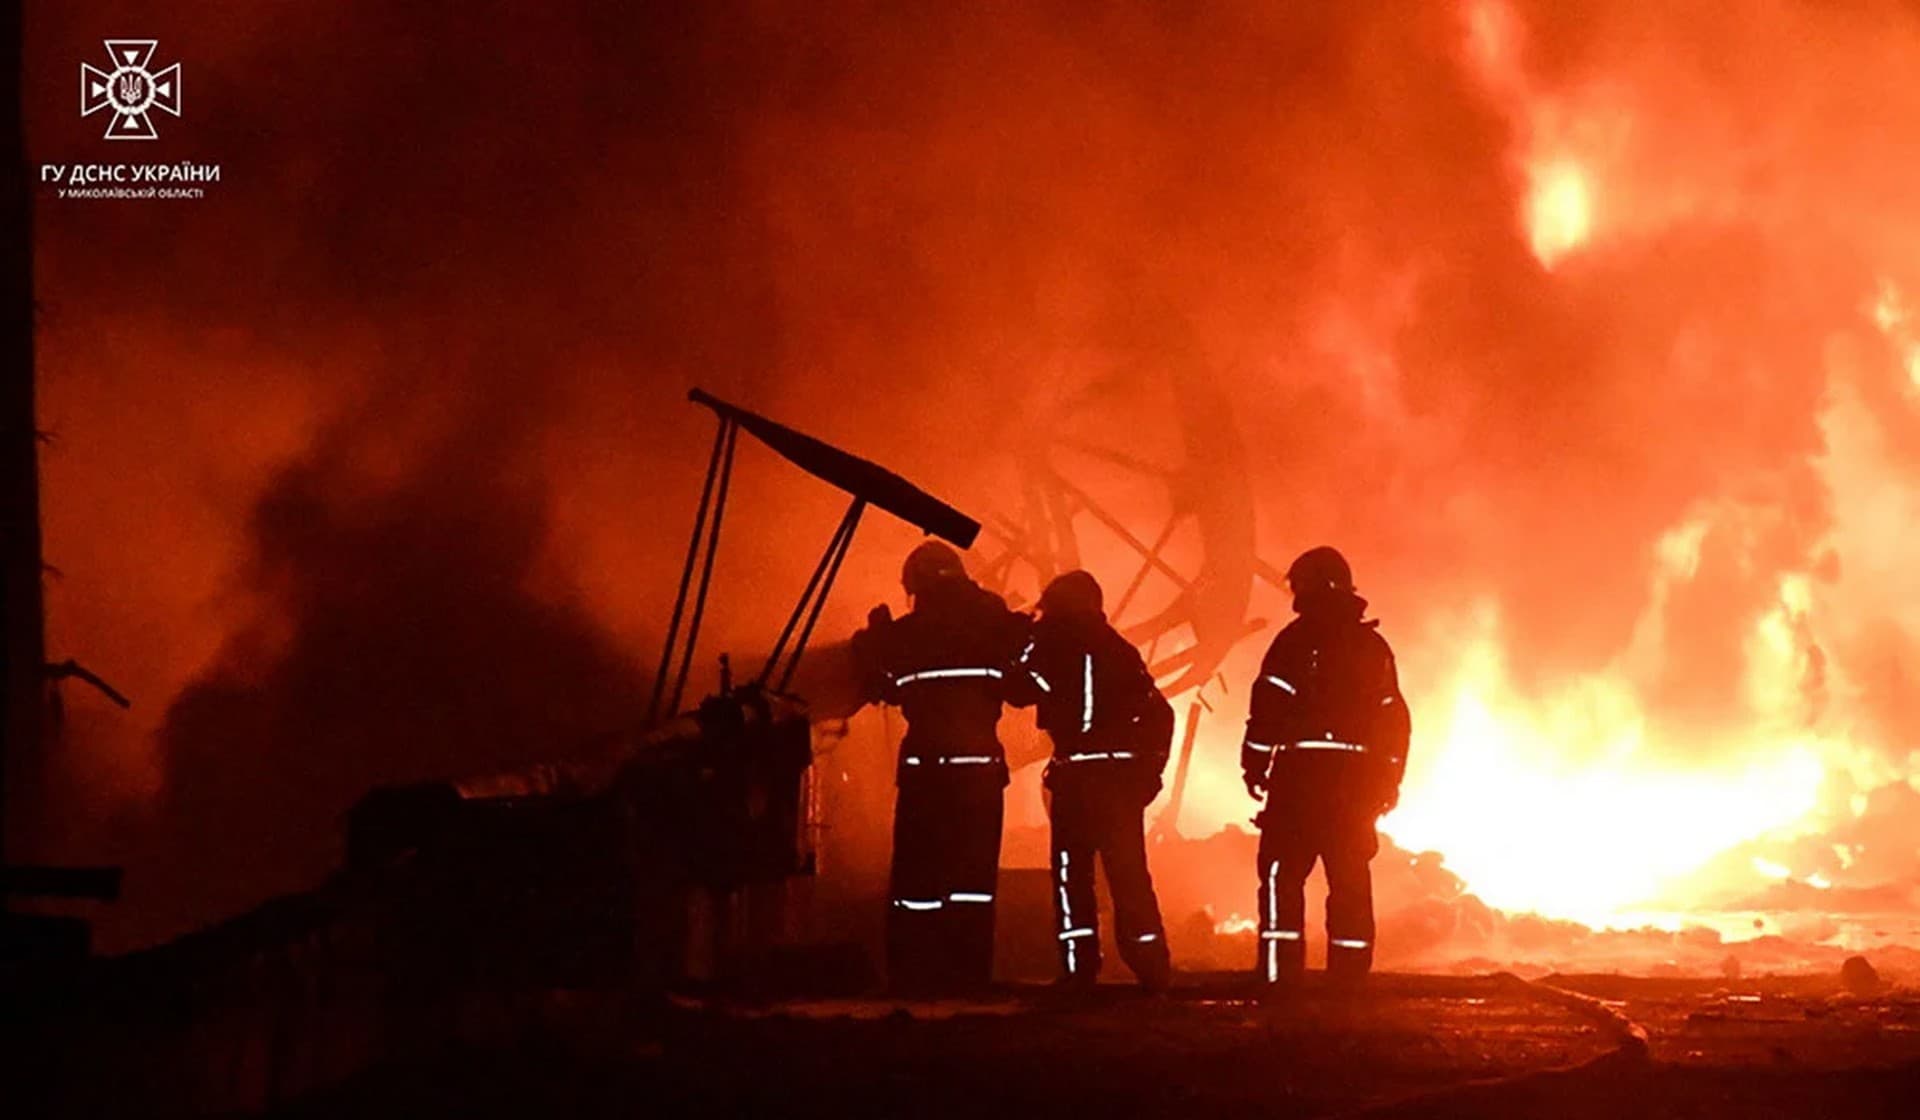 Firefighters work at a site of a sunflower oil storage tanks fire after strikes by Russian suicide drones in Mykolaiv